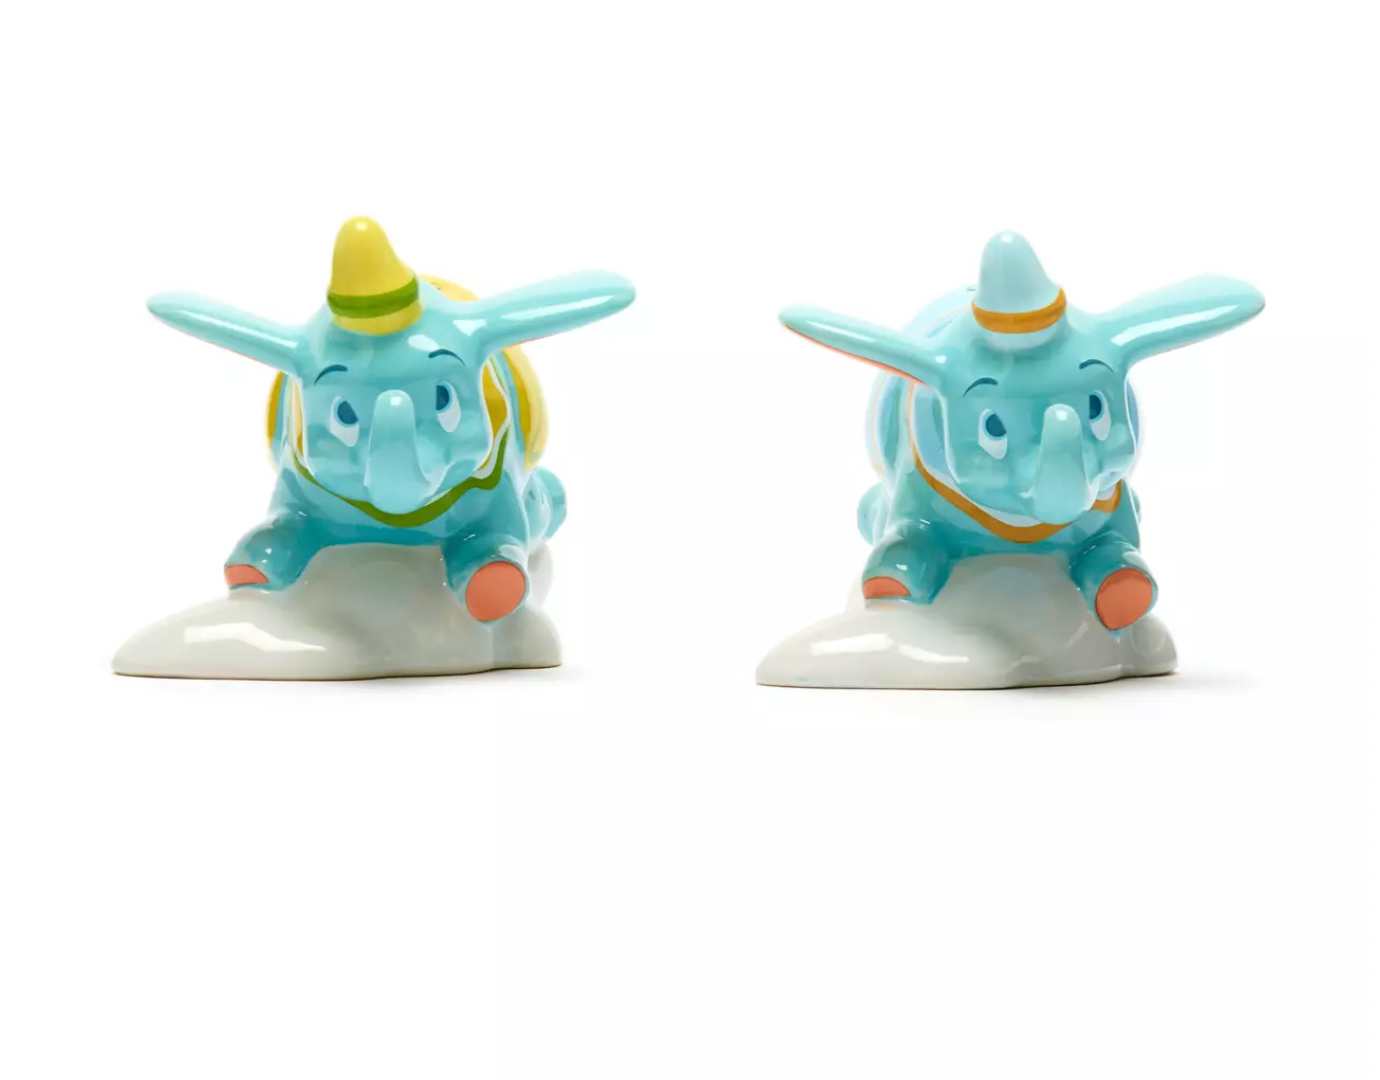 Disney Dumbo The Flying Elephant Salt and Pepper Shakers New with Box